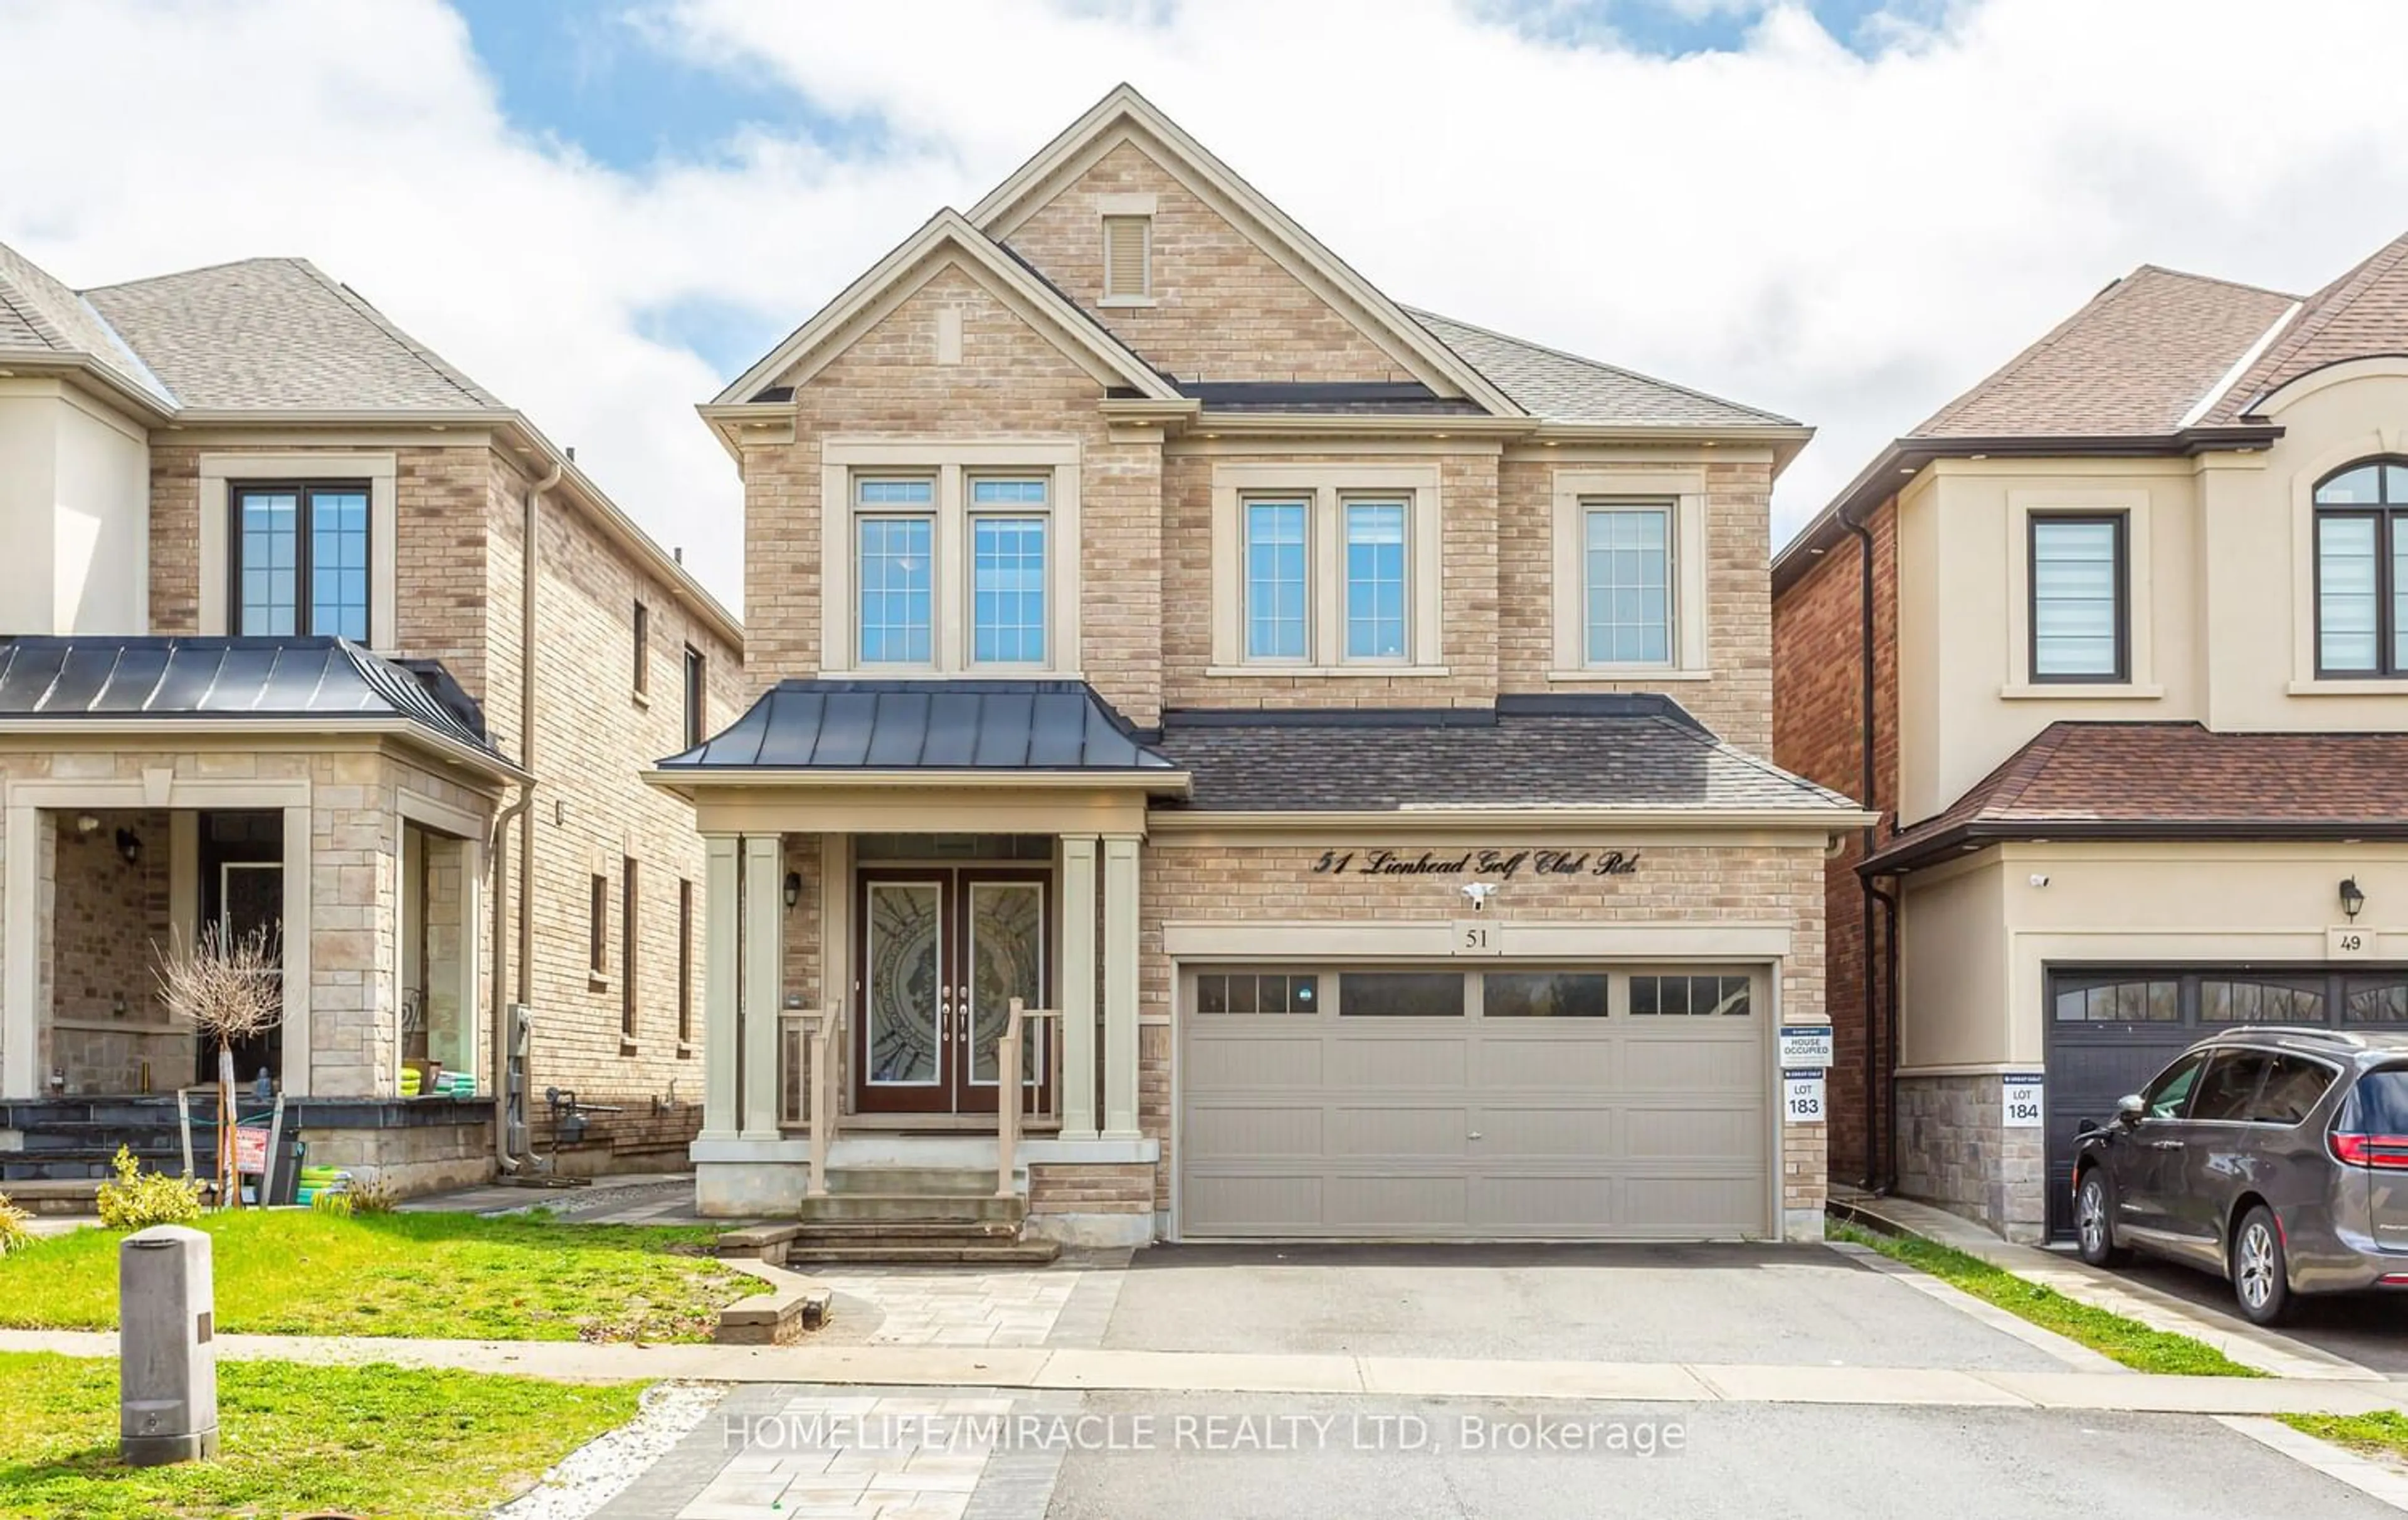 Home with brick exterior material for 51 Lionhead Golf Club Rd, Brampton Ontario L6Y 1P3